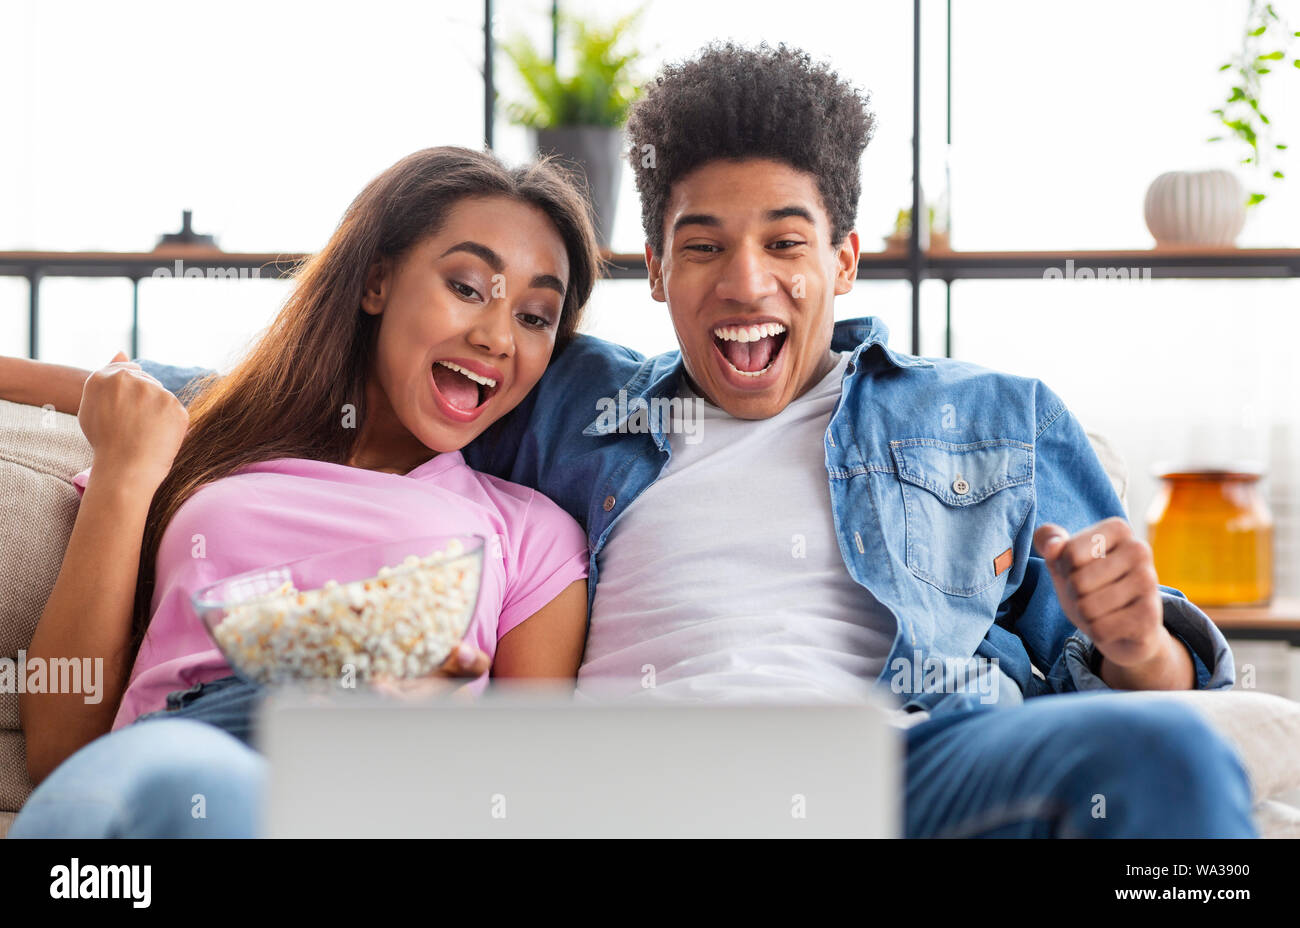 Laughing teenagers watching funny video on laptop Stock Photo